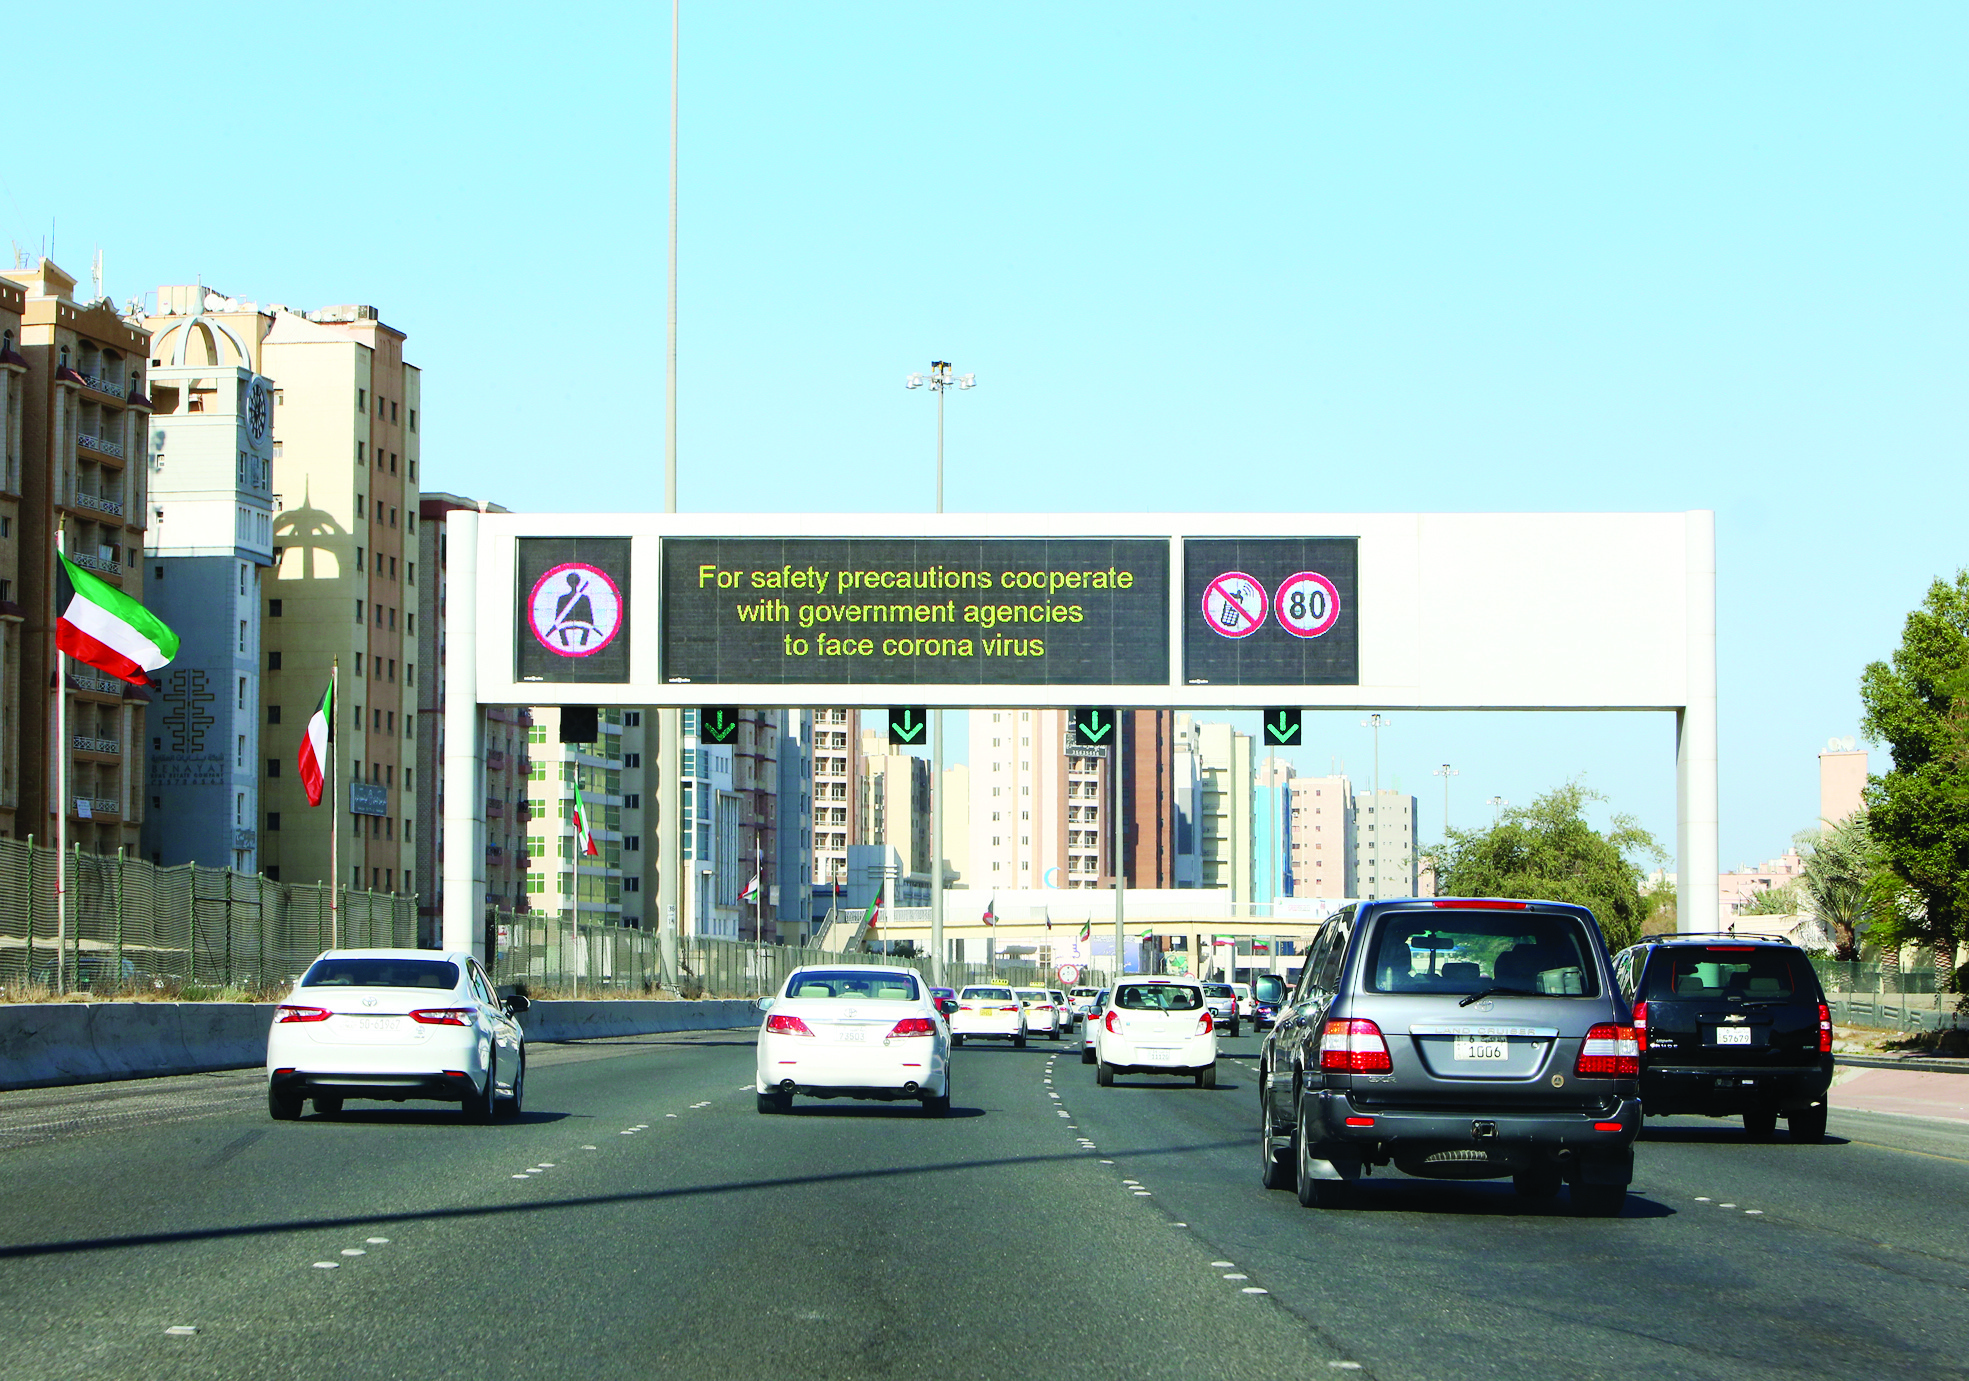 Vehicles pass by a billboard showing precautionary instructions against the coronavirus as they drive on a main highway in Kuwait City on March 3, 2020.